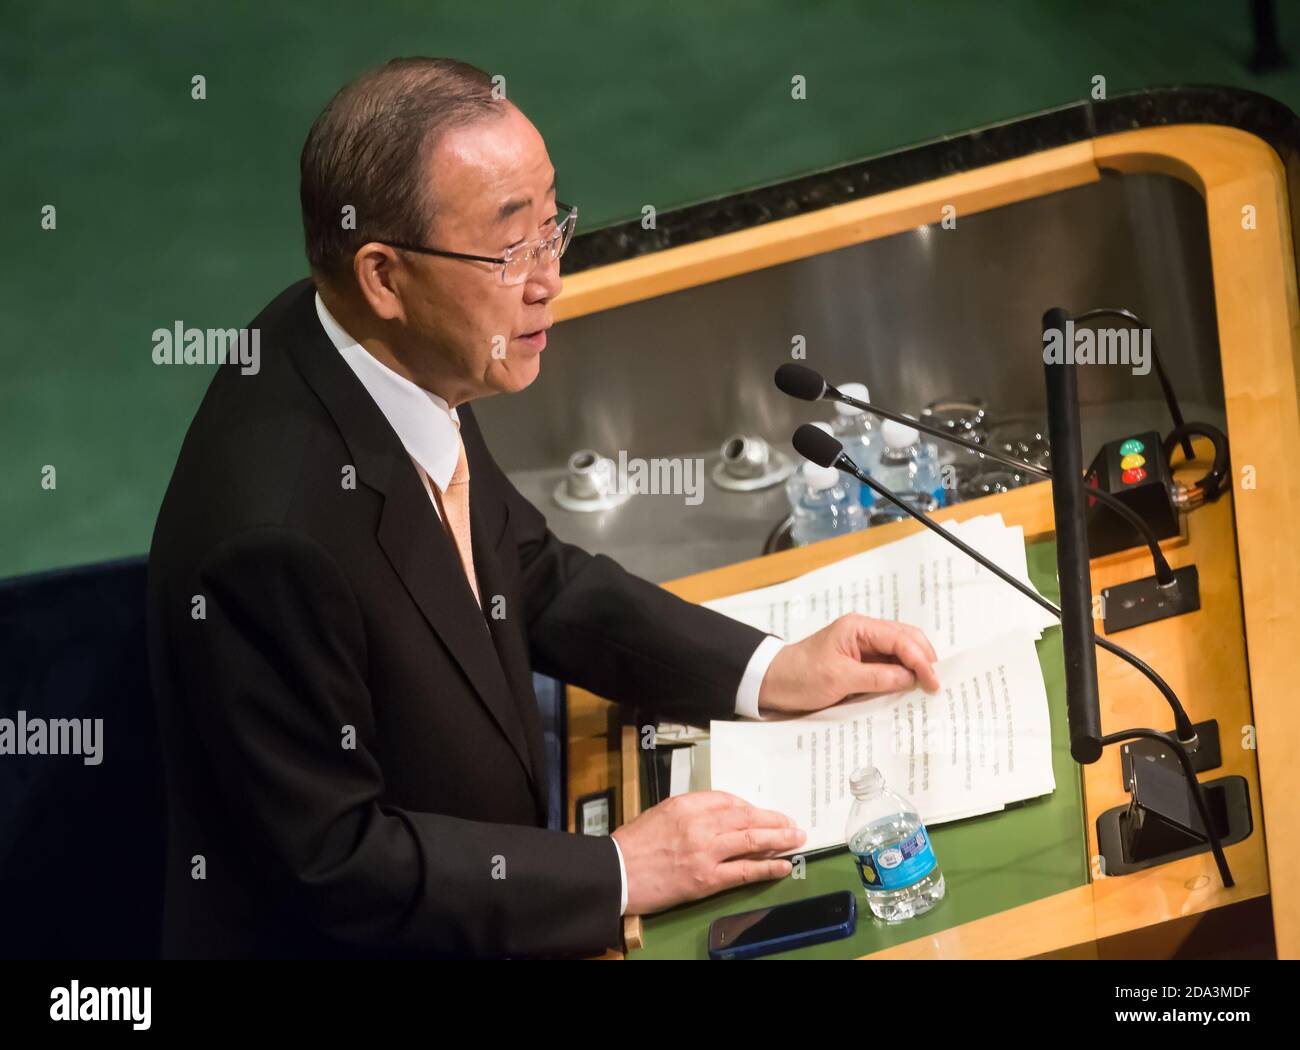 NEW YORK, USA - Sep 20, 2016: UN Secretary General Ban Ki-moon at the opening of the 71st session of the United Nations General Assembly in New York Stock Photo